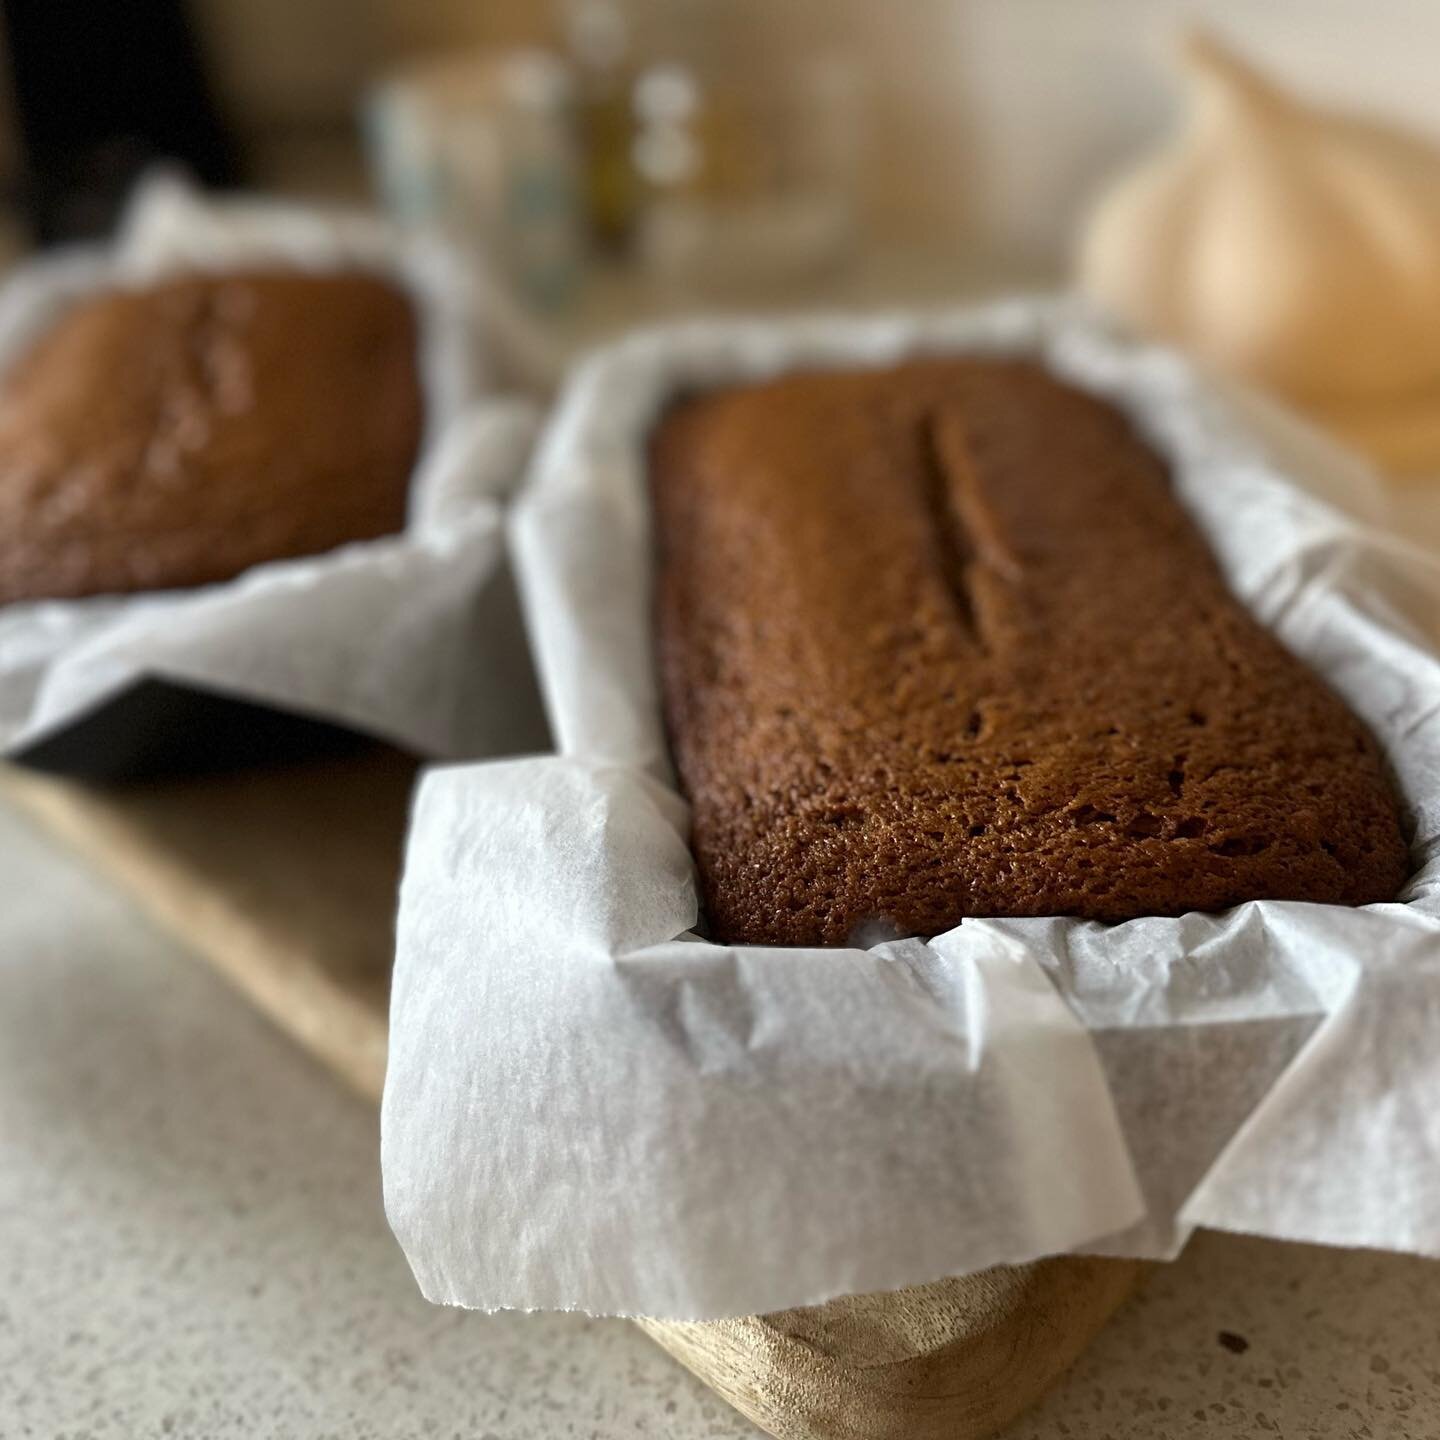 Weekend baking @albrownchef &lsquo;best gingerbread in the world&rsquo; makes two loaves&hellip; one for my folks to take home to Orewa &amp; one for unexpected visitors #homebaked #baking #madewithlove #gingerbread #favouriterecipe #foodwriter #food